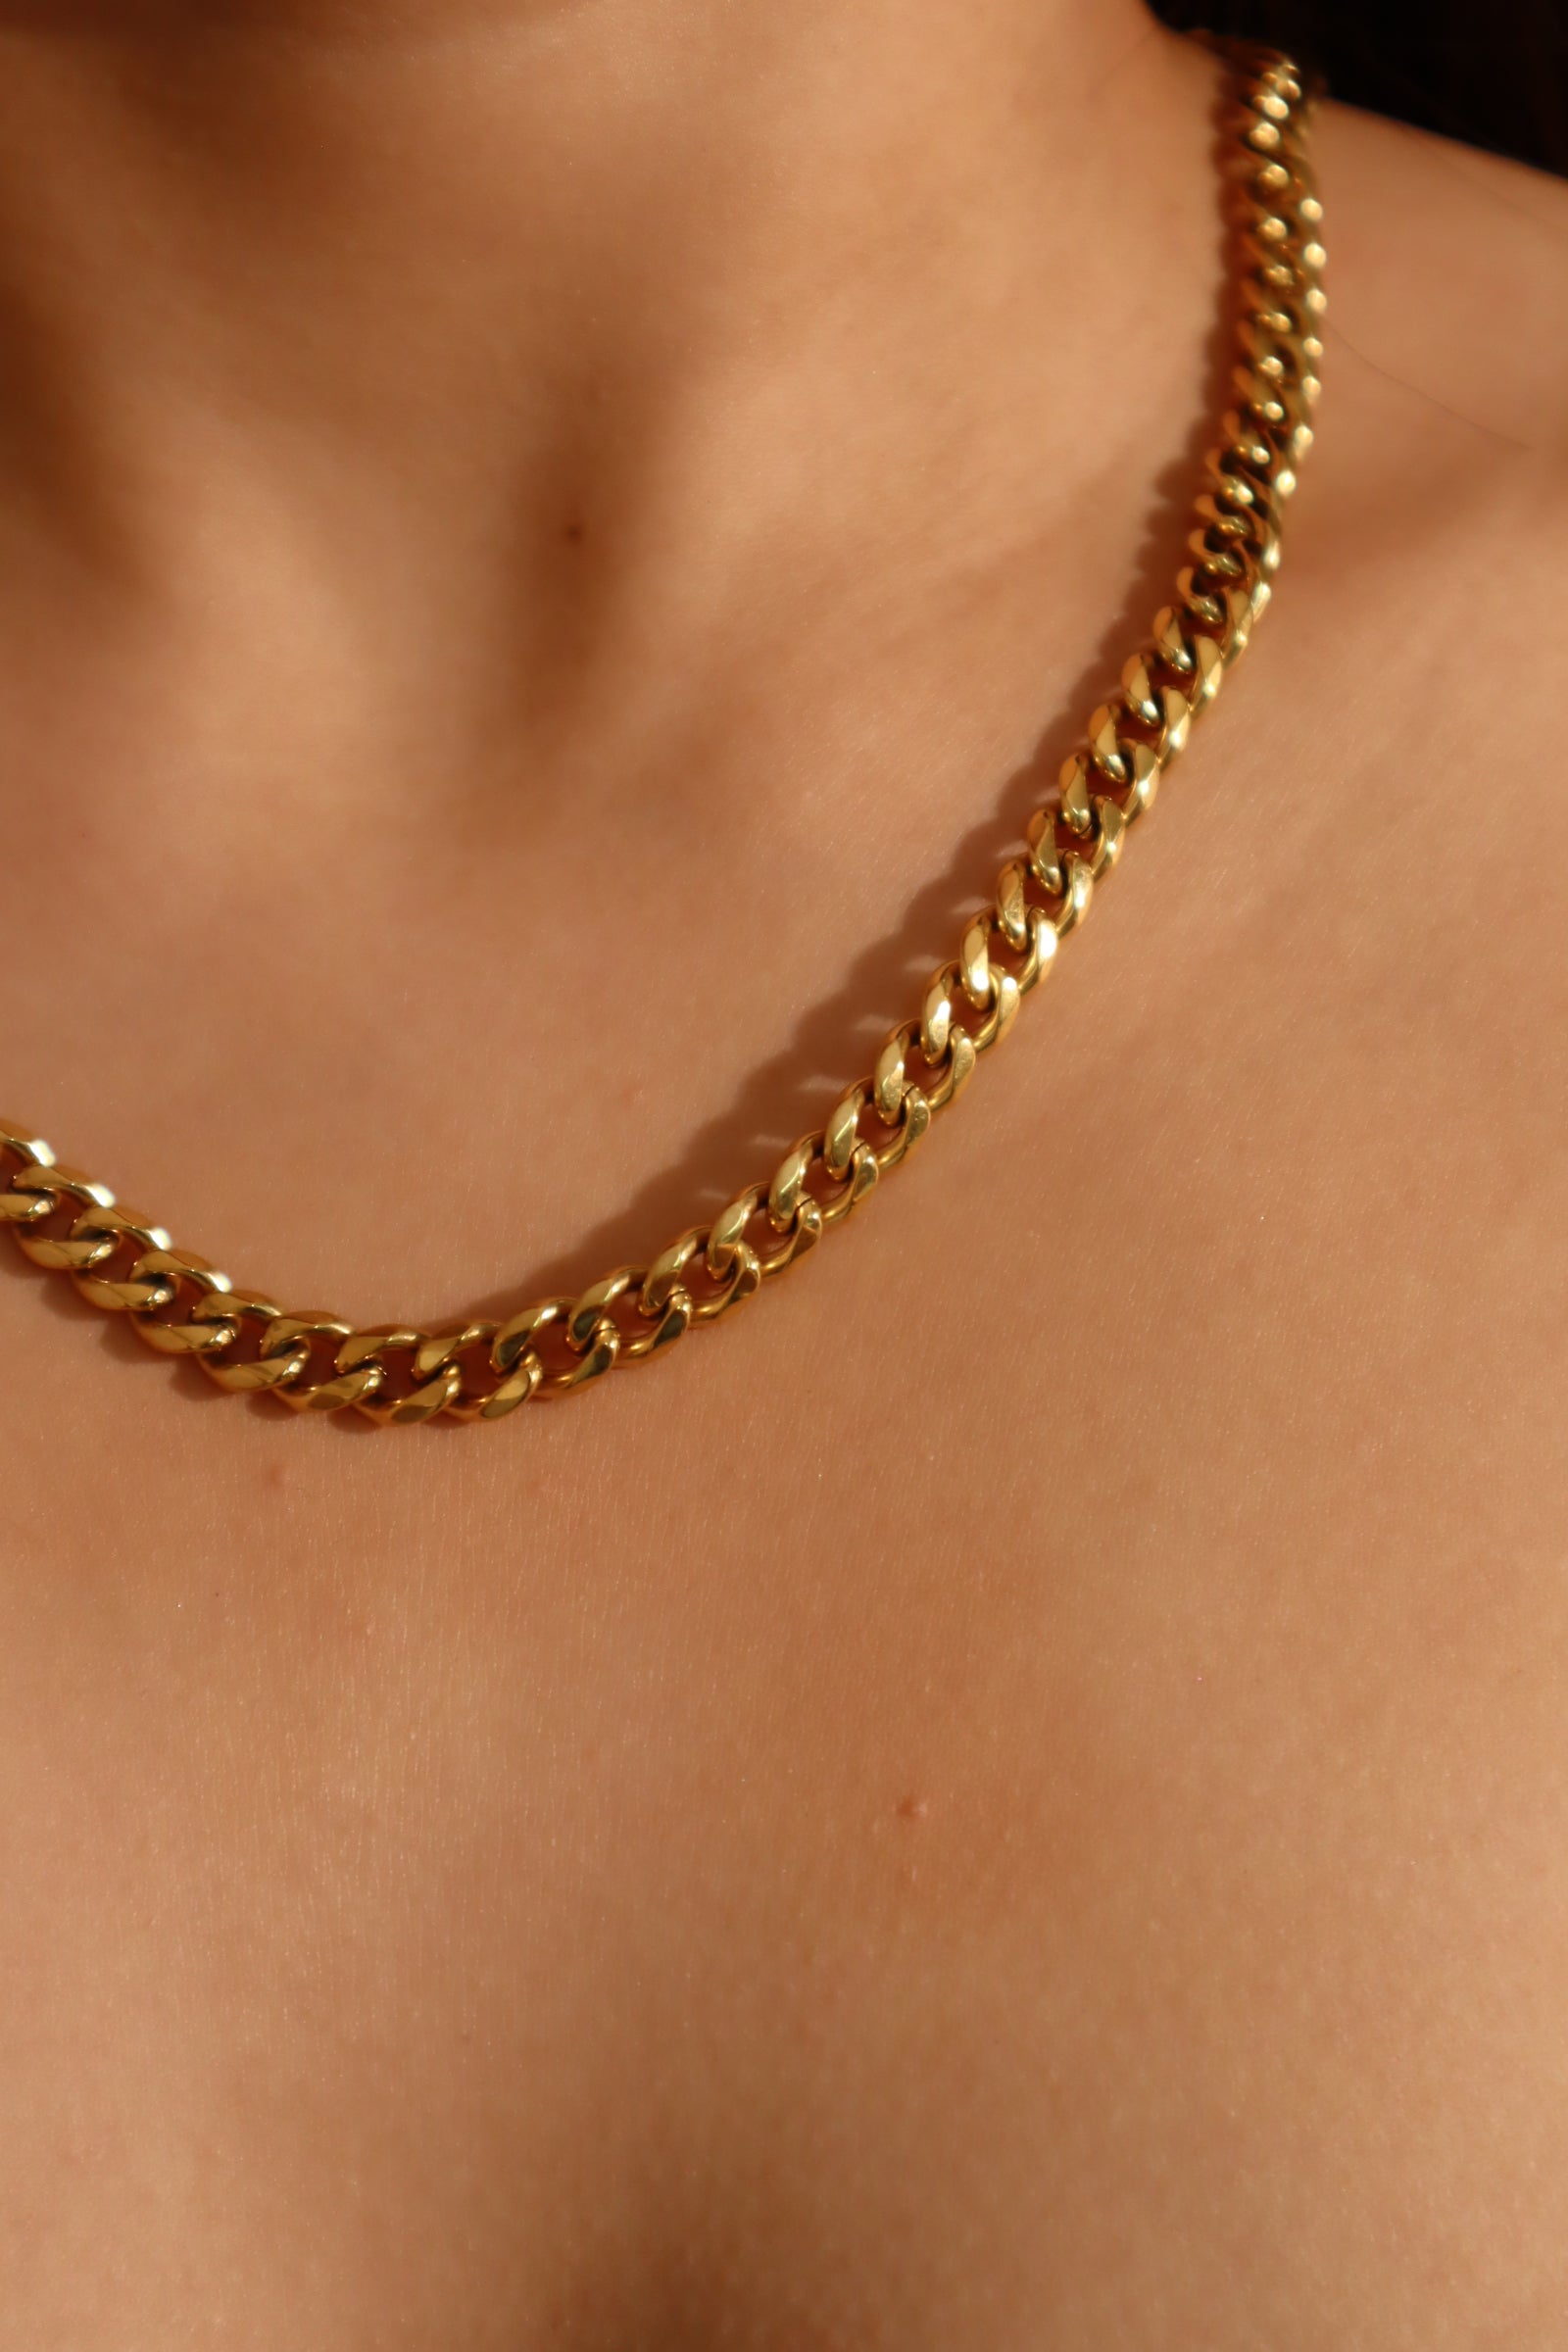 18K Gold stainless steel chain necklace